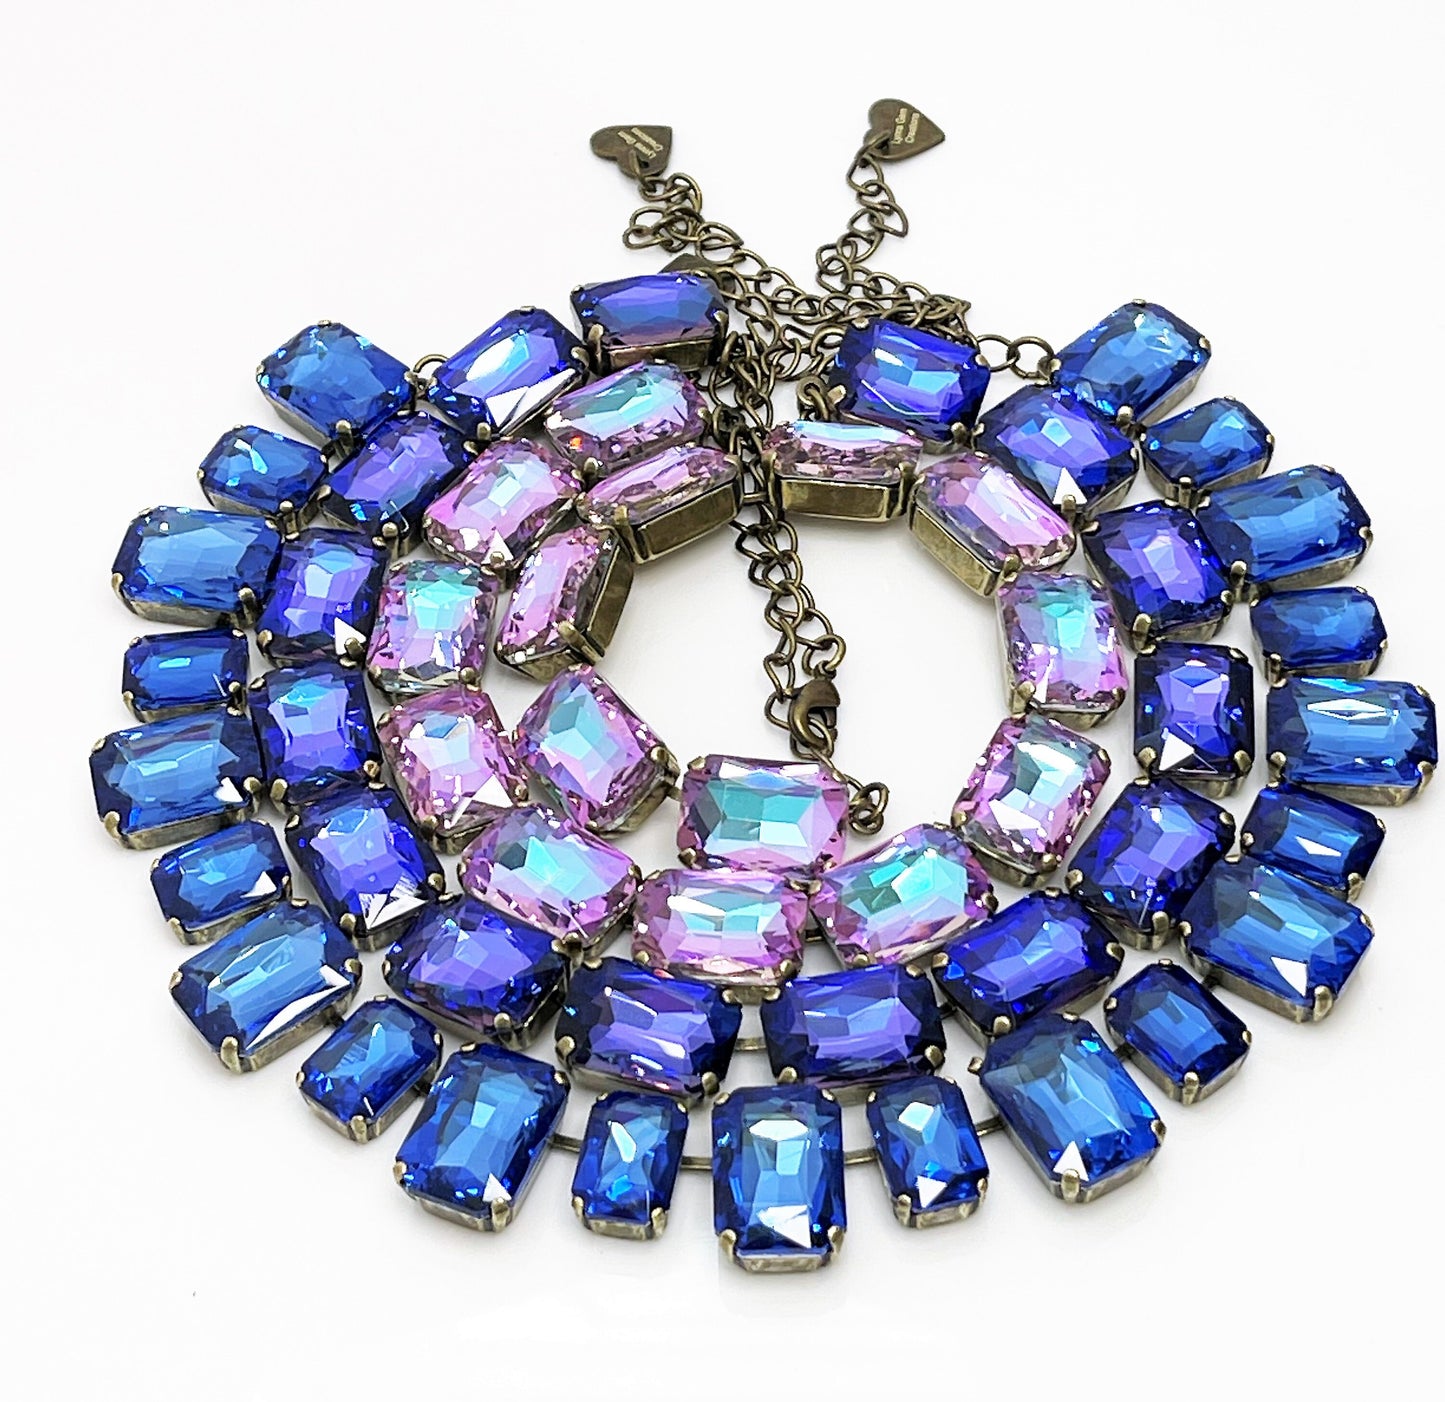 Anna Wintour Necklace, Blue Georgian Collet, Sapphire Crystal Choker, Riviere Necklace, Statement Necklace, Layering Chokers